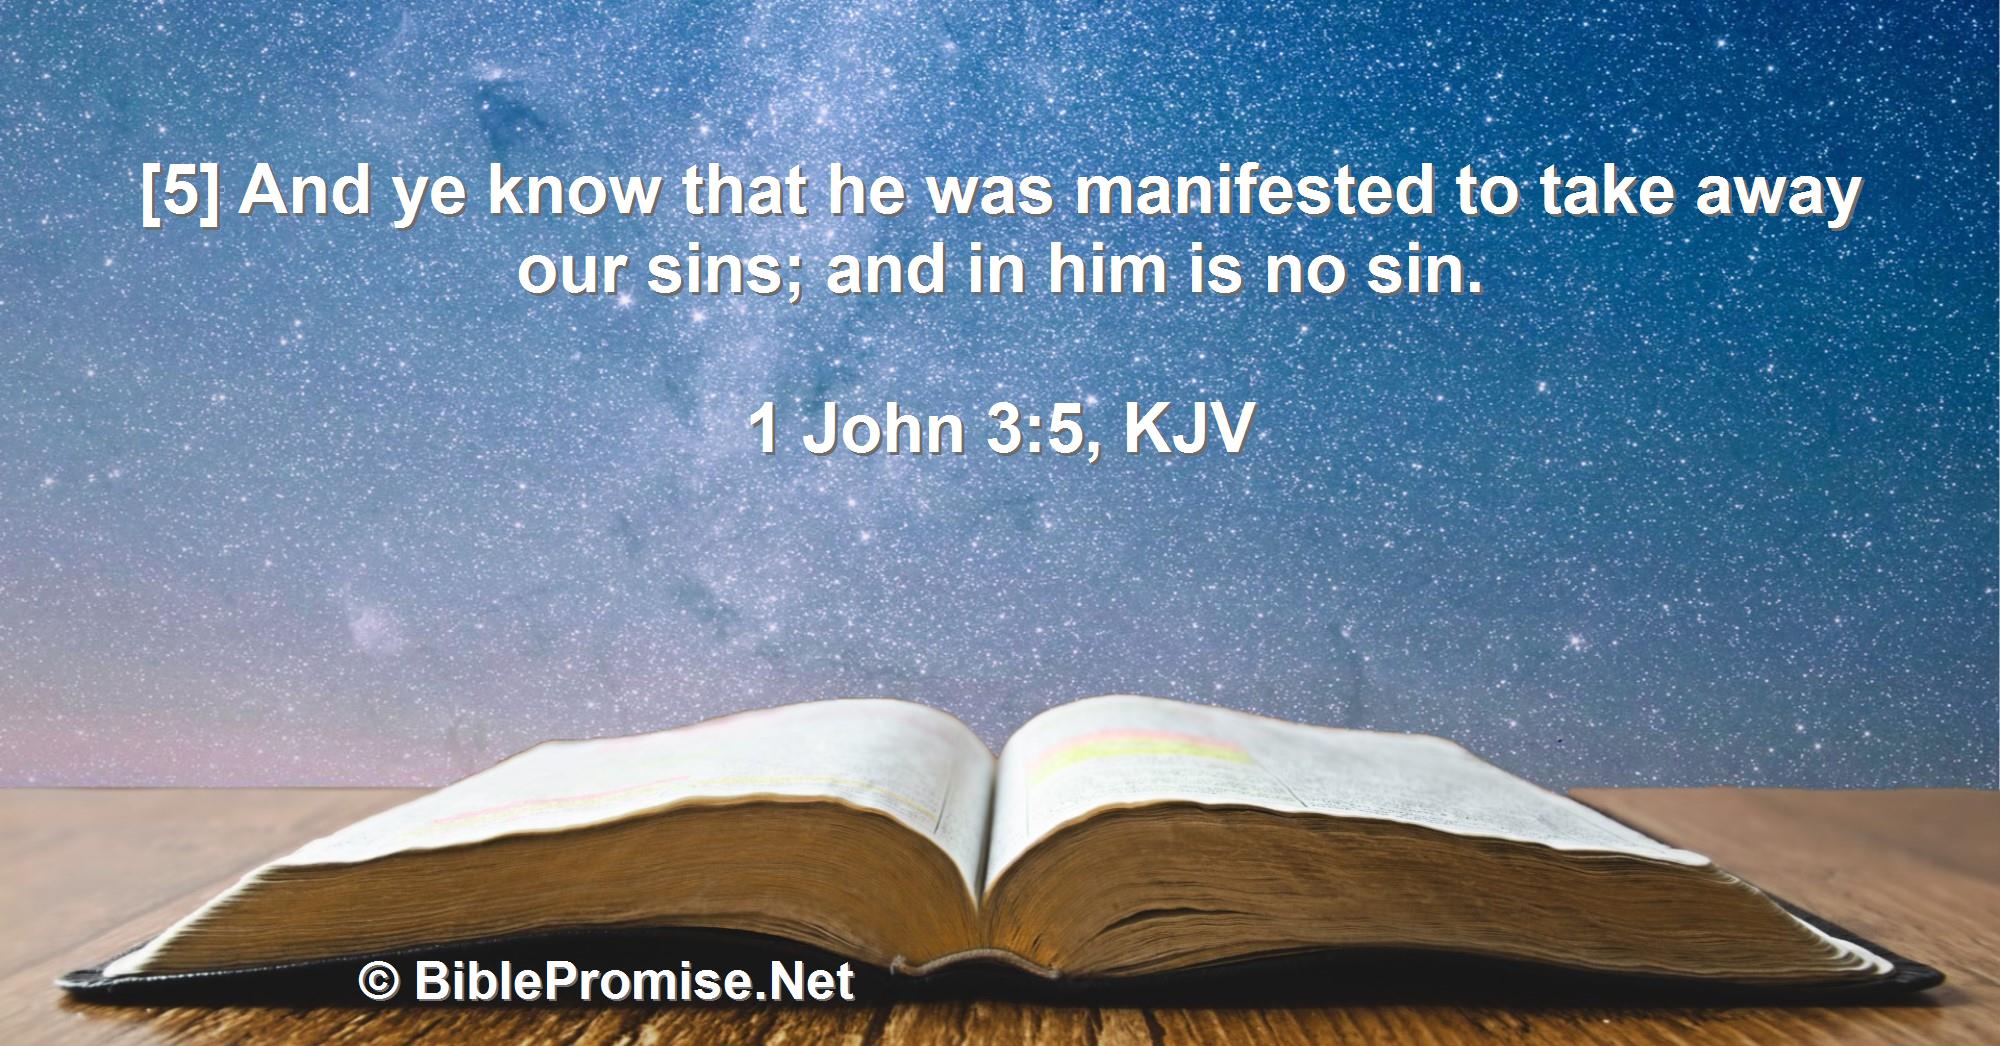 Saturday, June 17, 2023 - 1 John 3:5 (KJV) - Bible promise that Jesus was manifested to take away our sins.